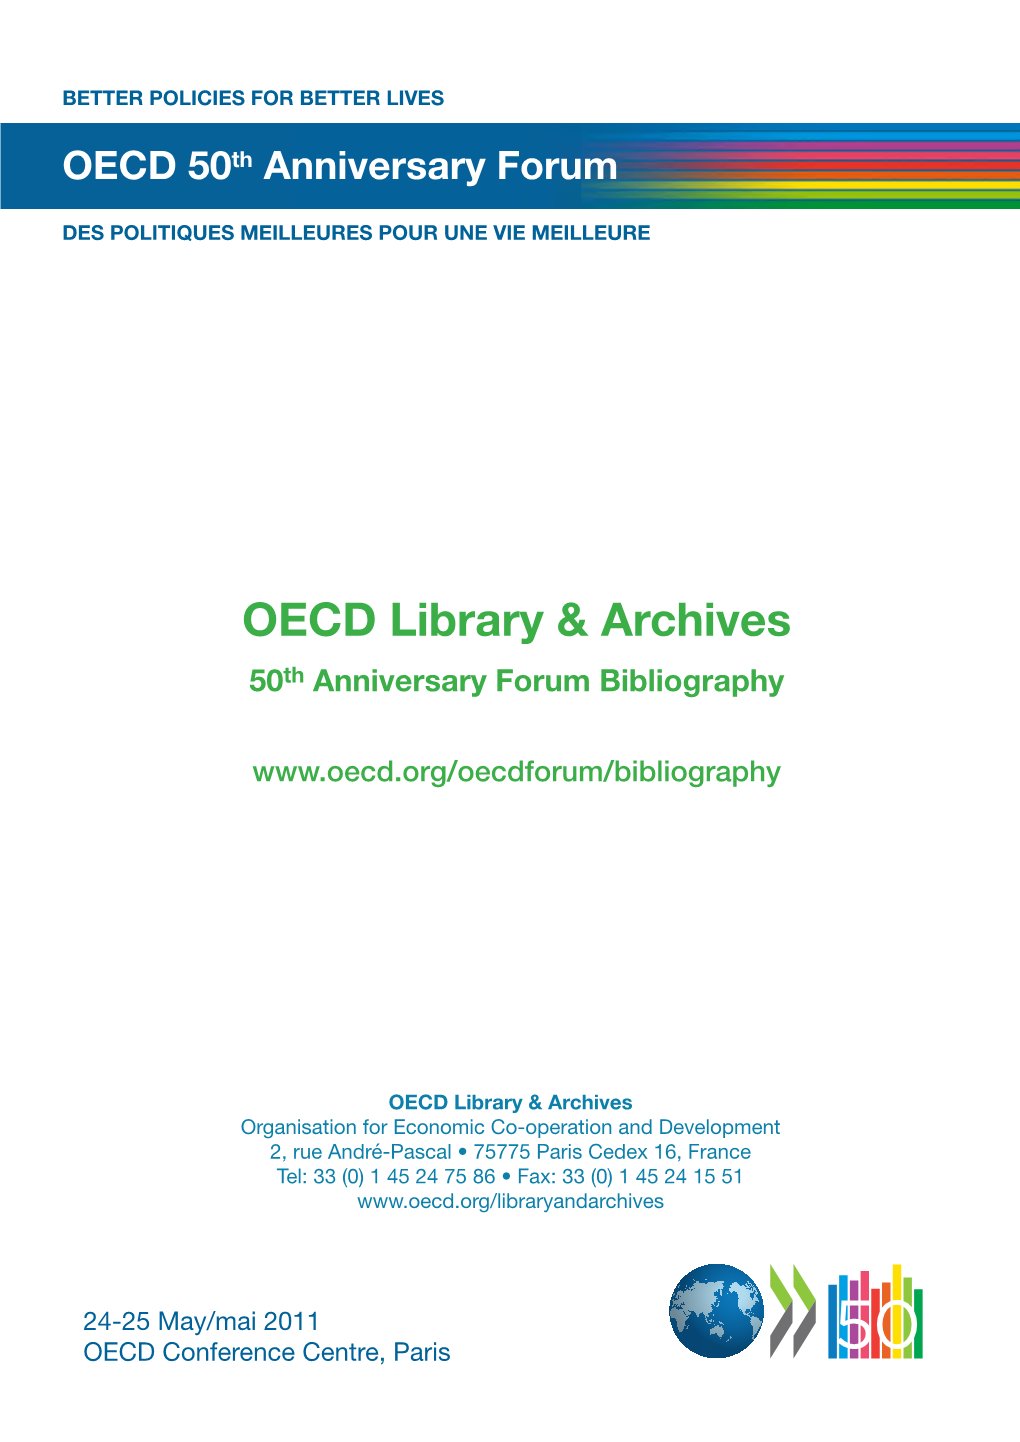 OECD Library & Archives